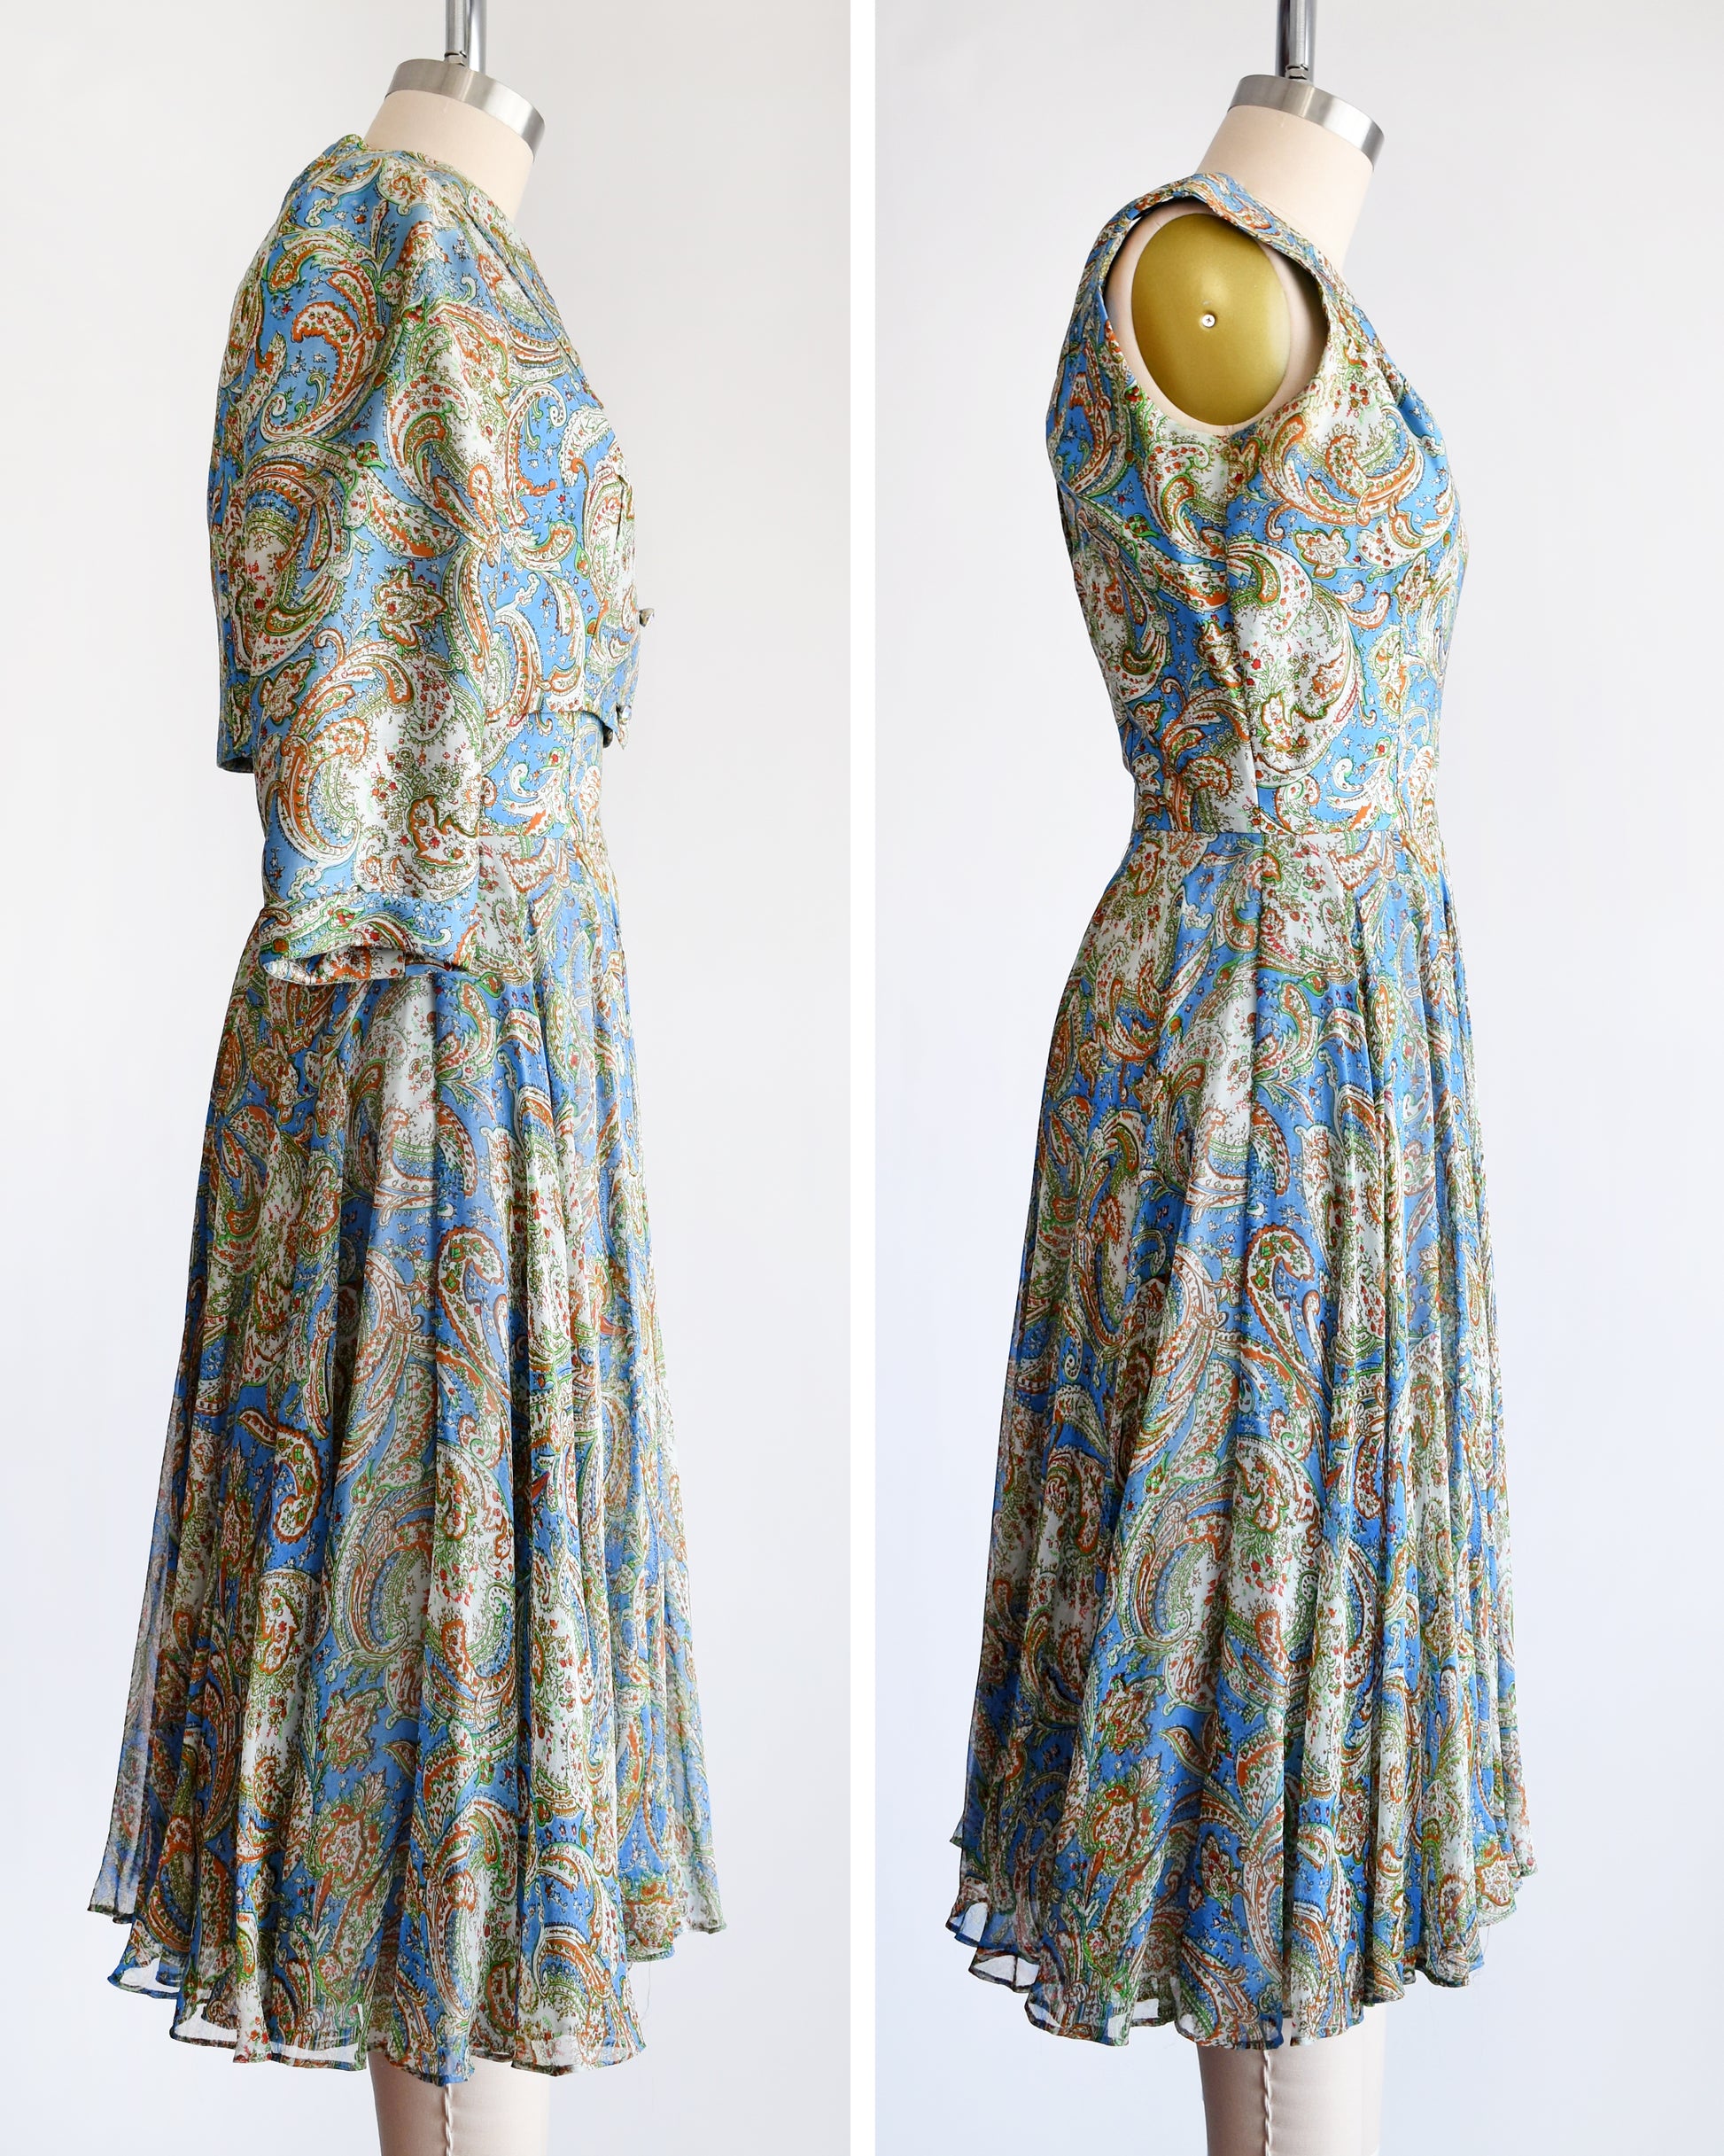 side by side views of a vintage 1950s silk paisley dress set by Saks Fifth Avenue. the jacket is off in the right photo